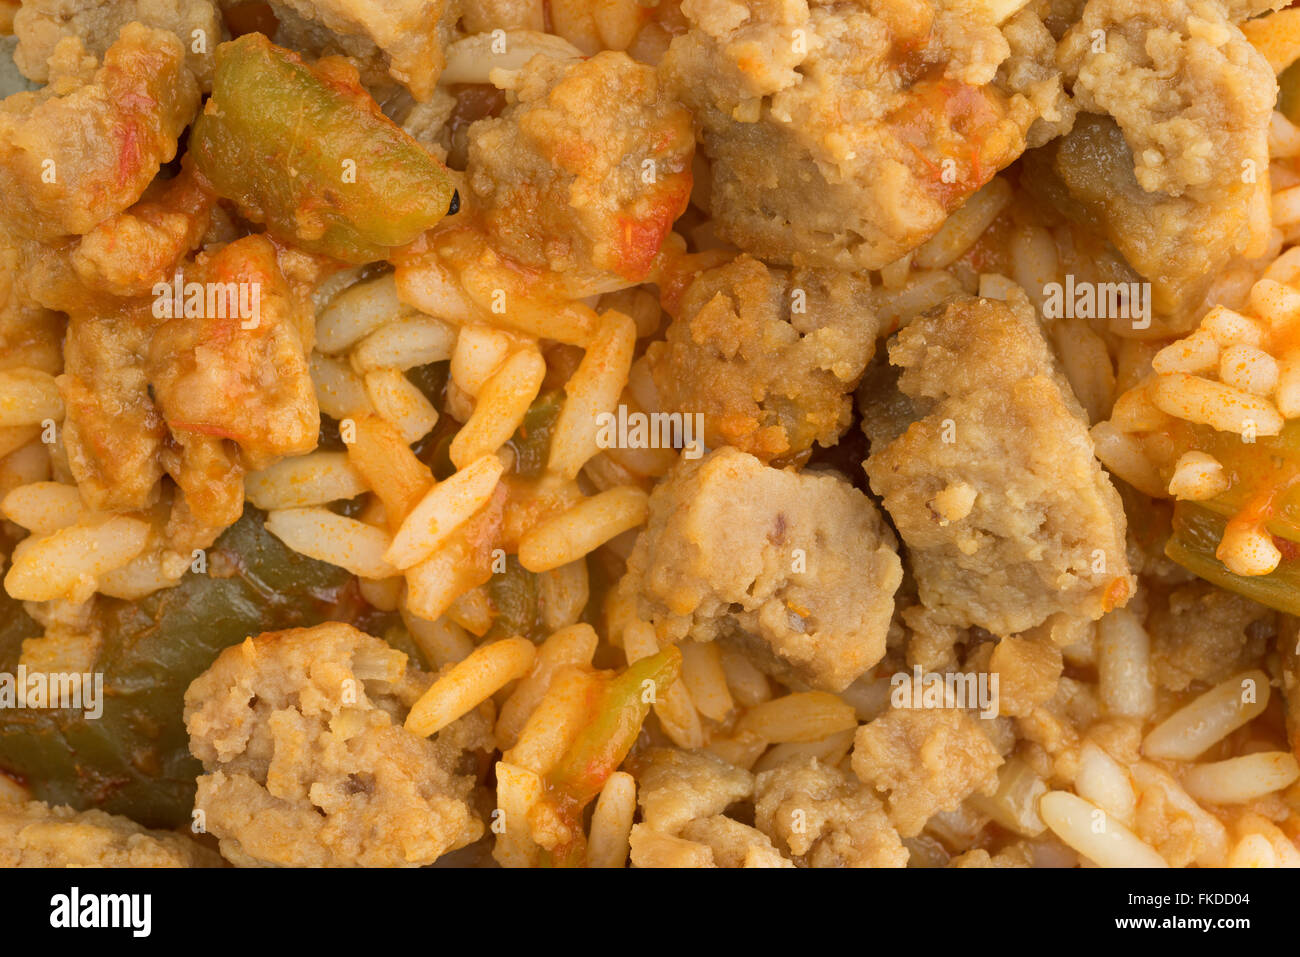 A very close view of rice, green peppers and chunks of beef. Stock Photo